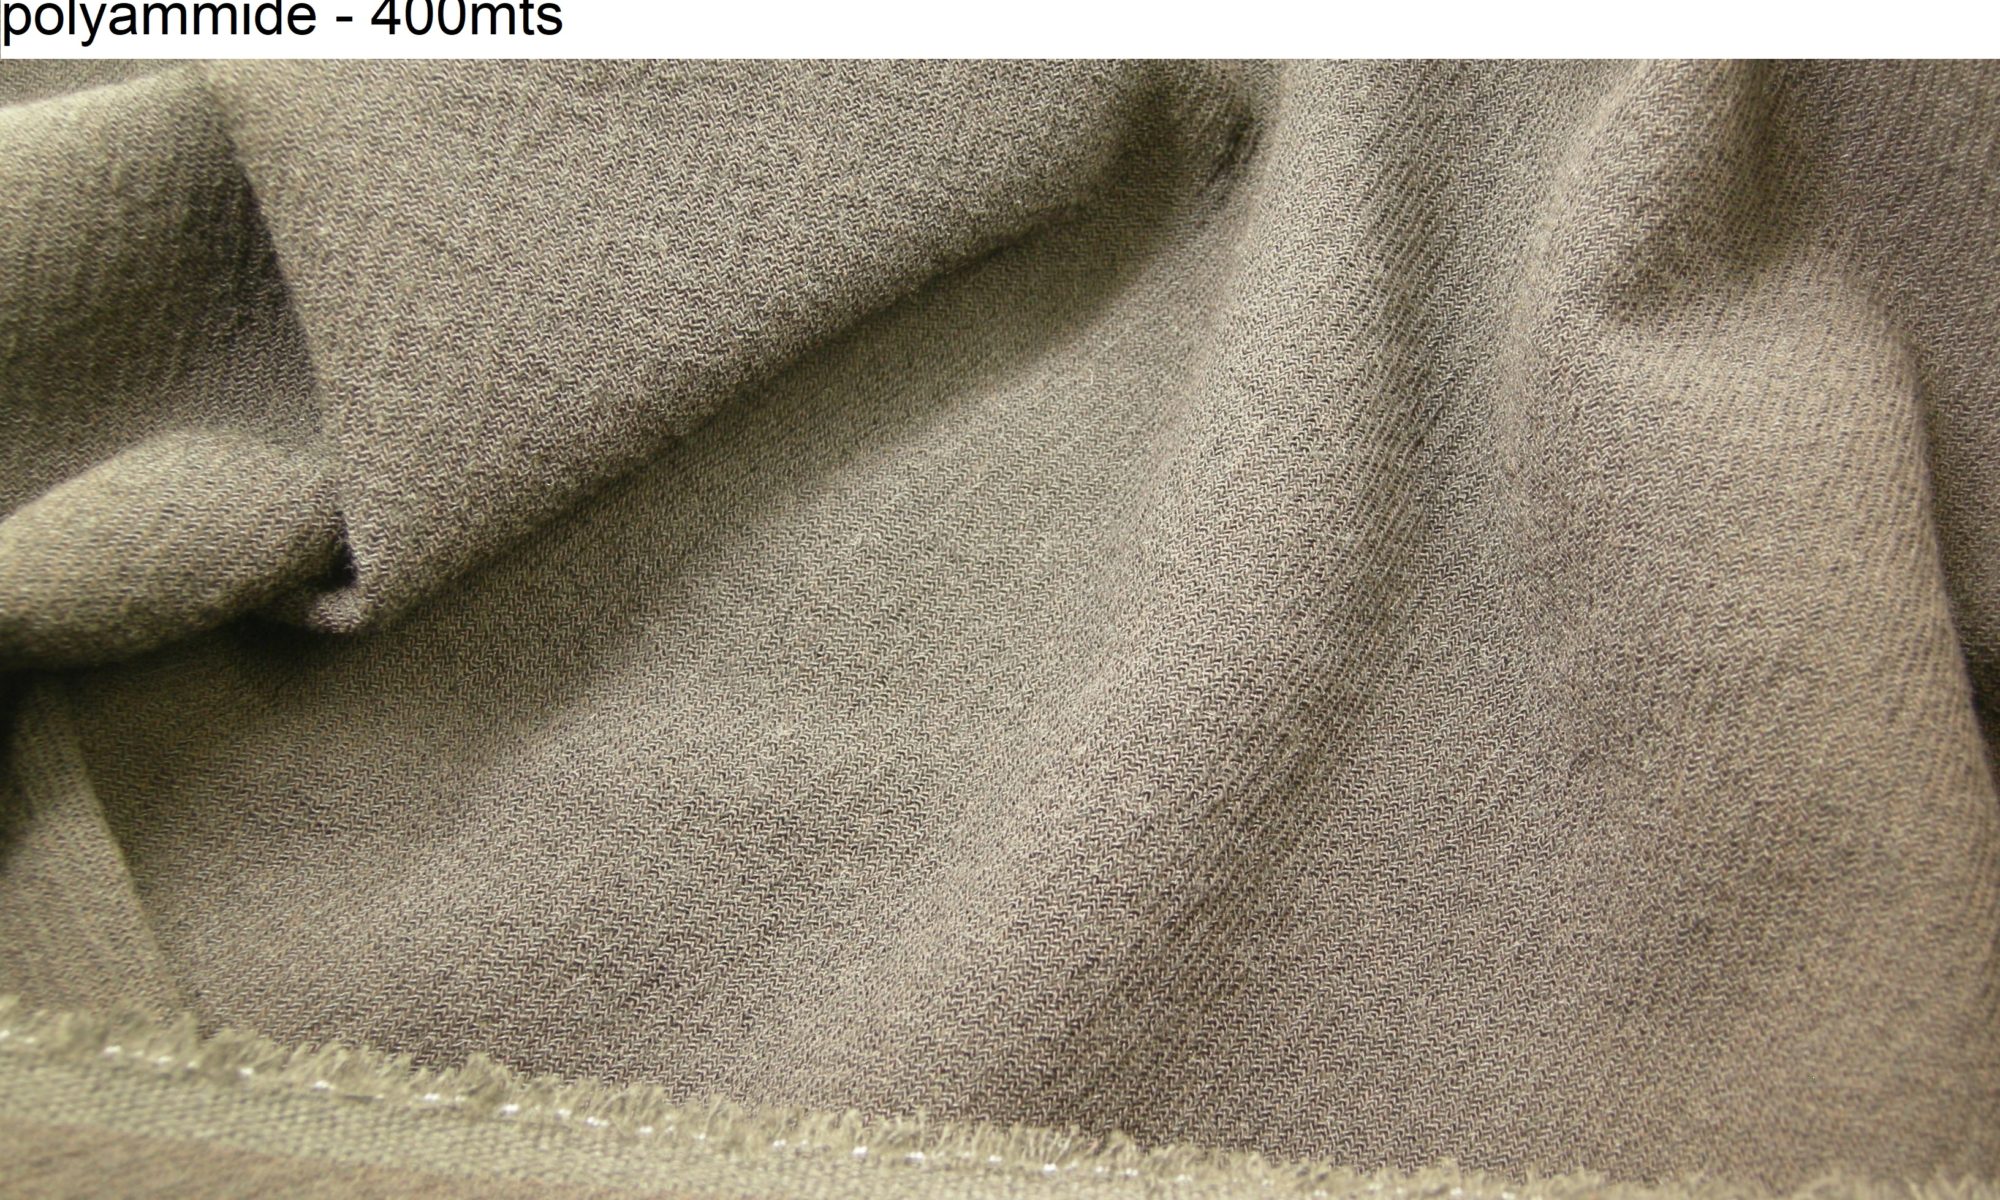 ART 7395 wool blend twill jacket pants fashion fabric WIDTH cm145 WEIGHT gr420 - gr289 square meter - COMPOSITION 93 wool 7 polyammide - 400mts